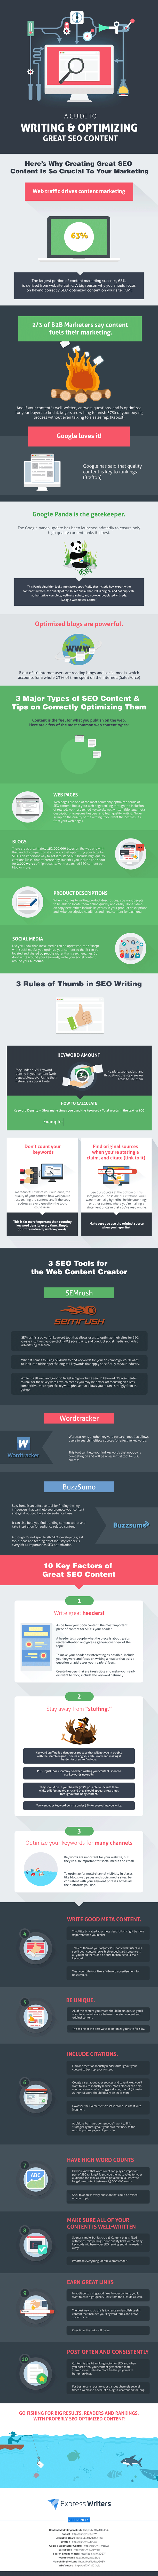 10 SEO Tips in 2018 to Increase Google Rankings & Traffic [Infographic]